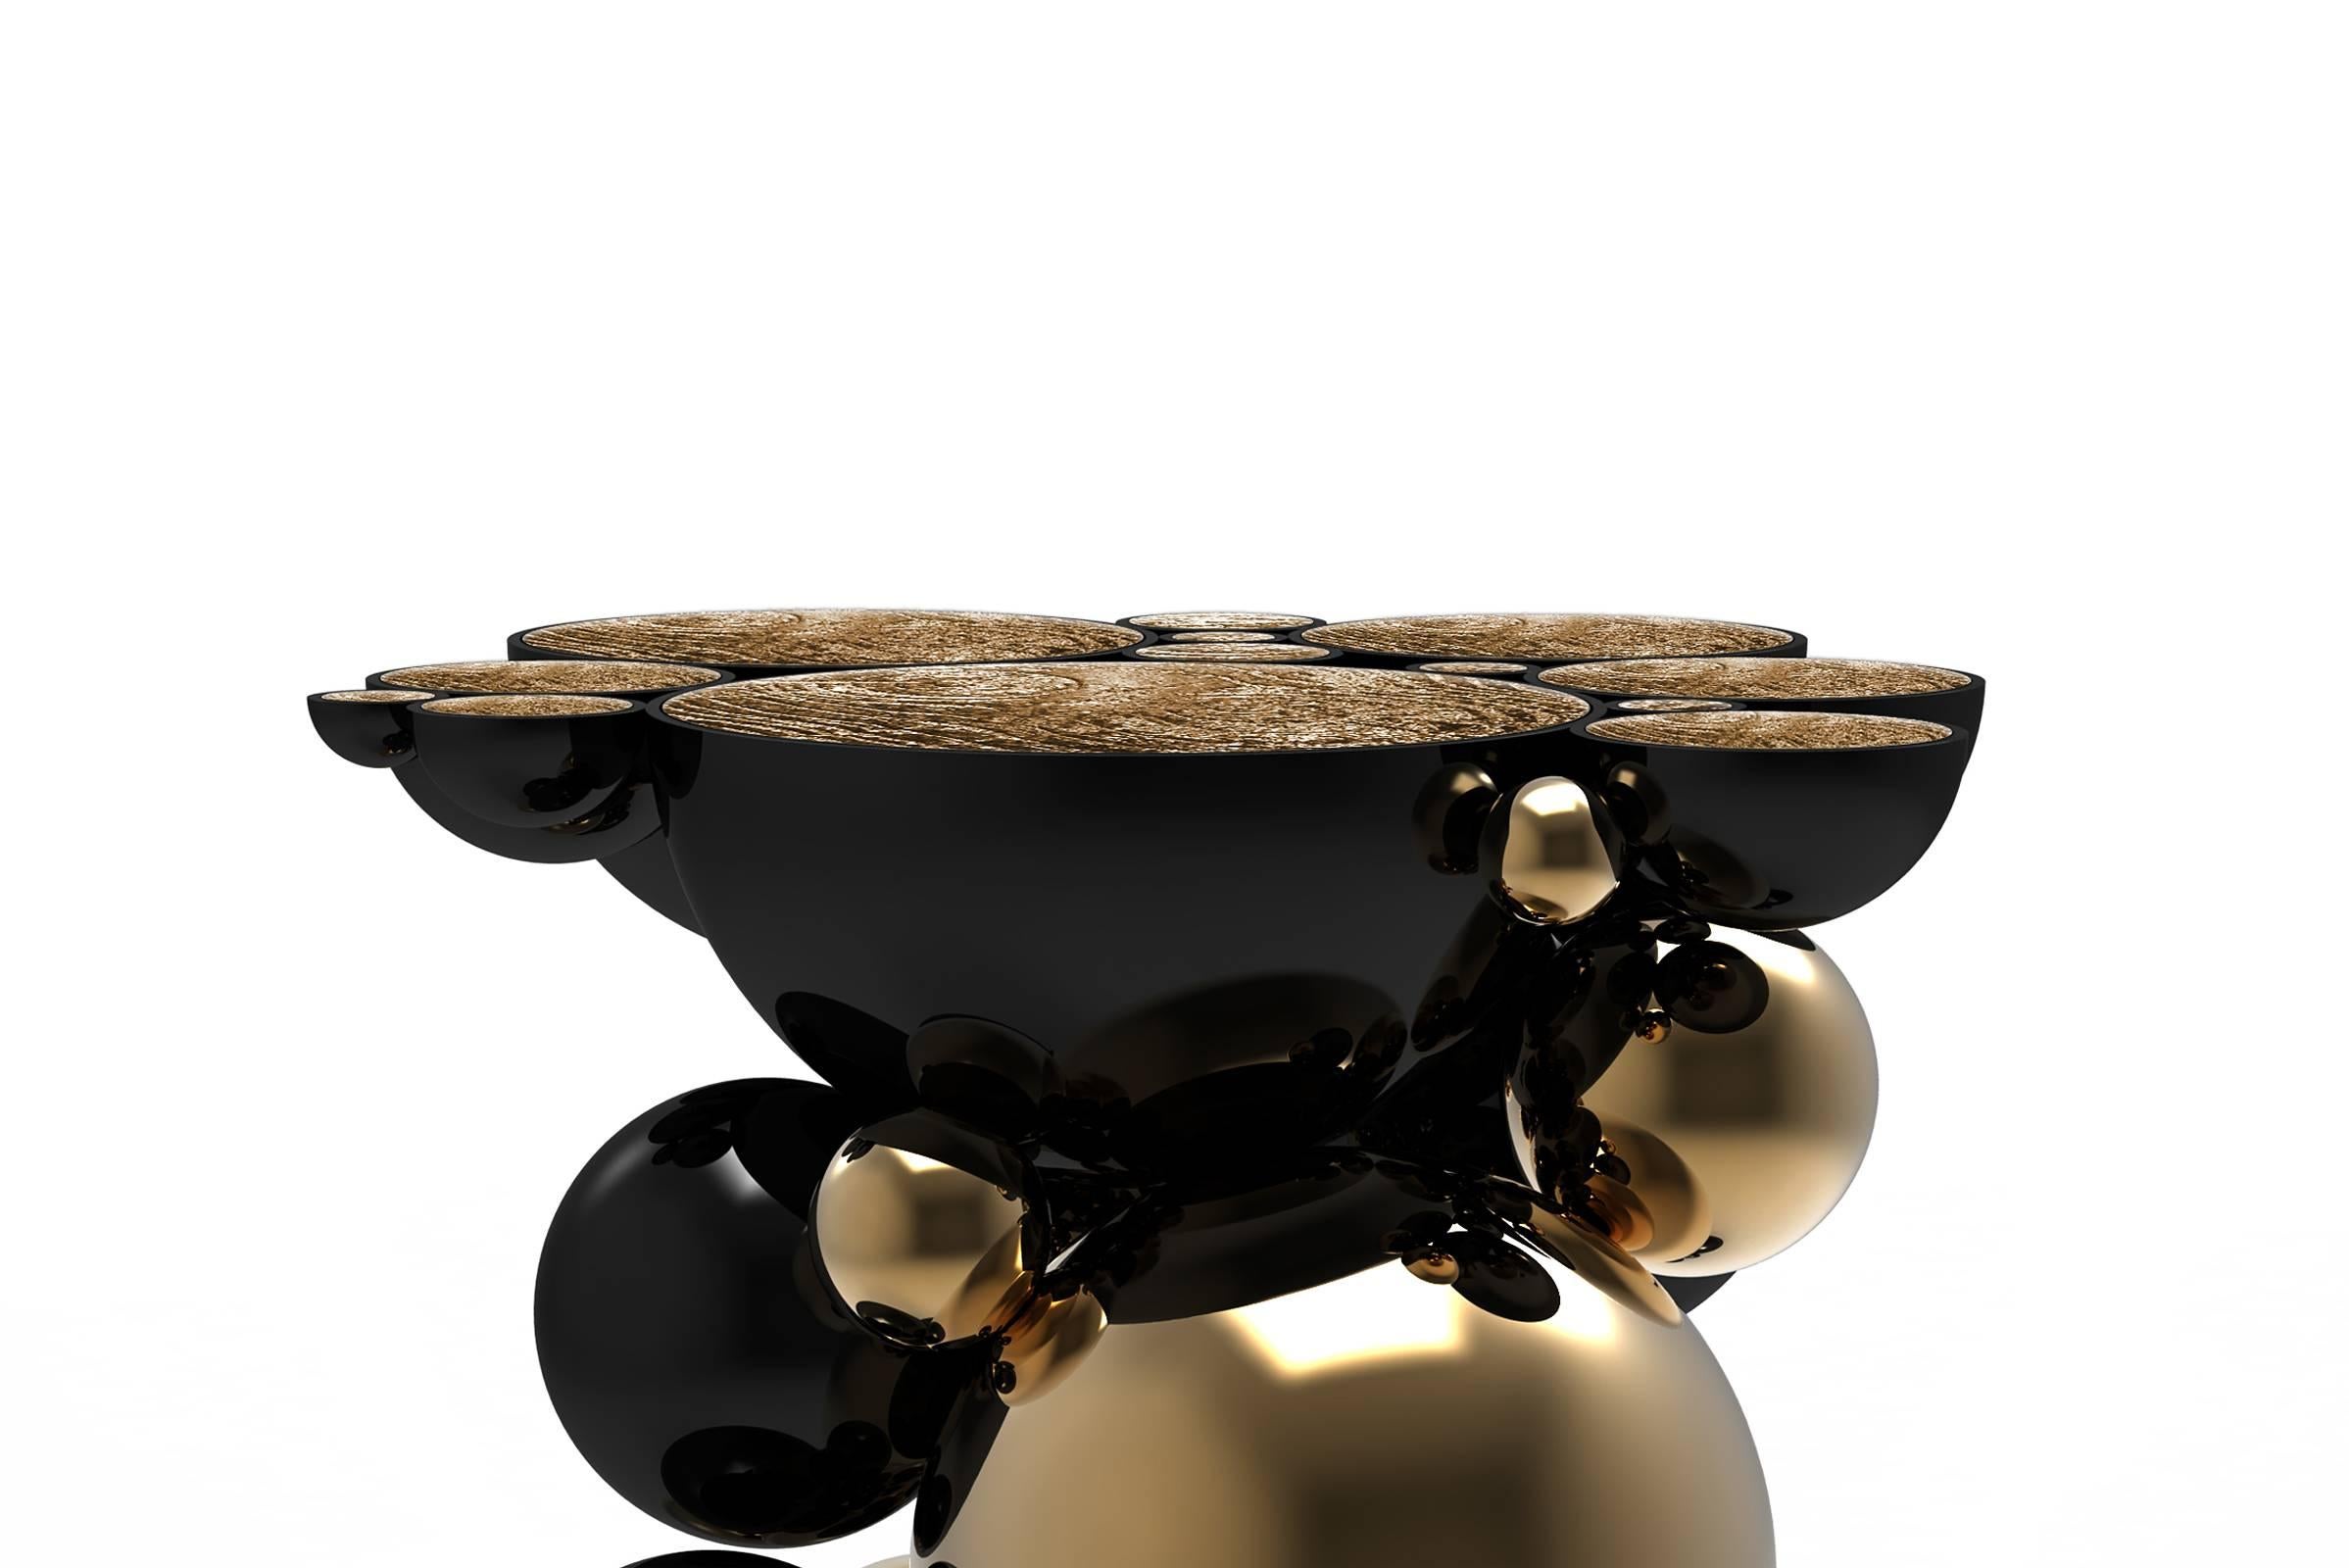 Side table spheres composed by metallic spheres
and semi spheres joined together. Aluminium black and
gold finish.
